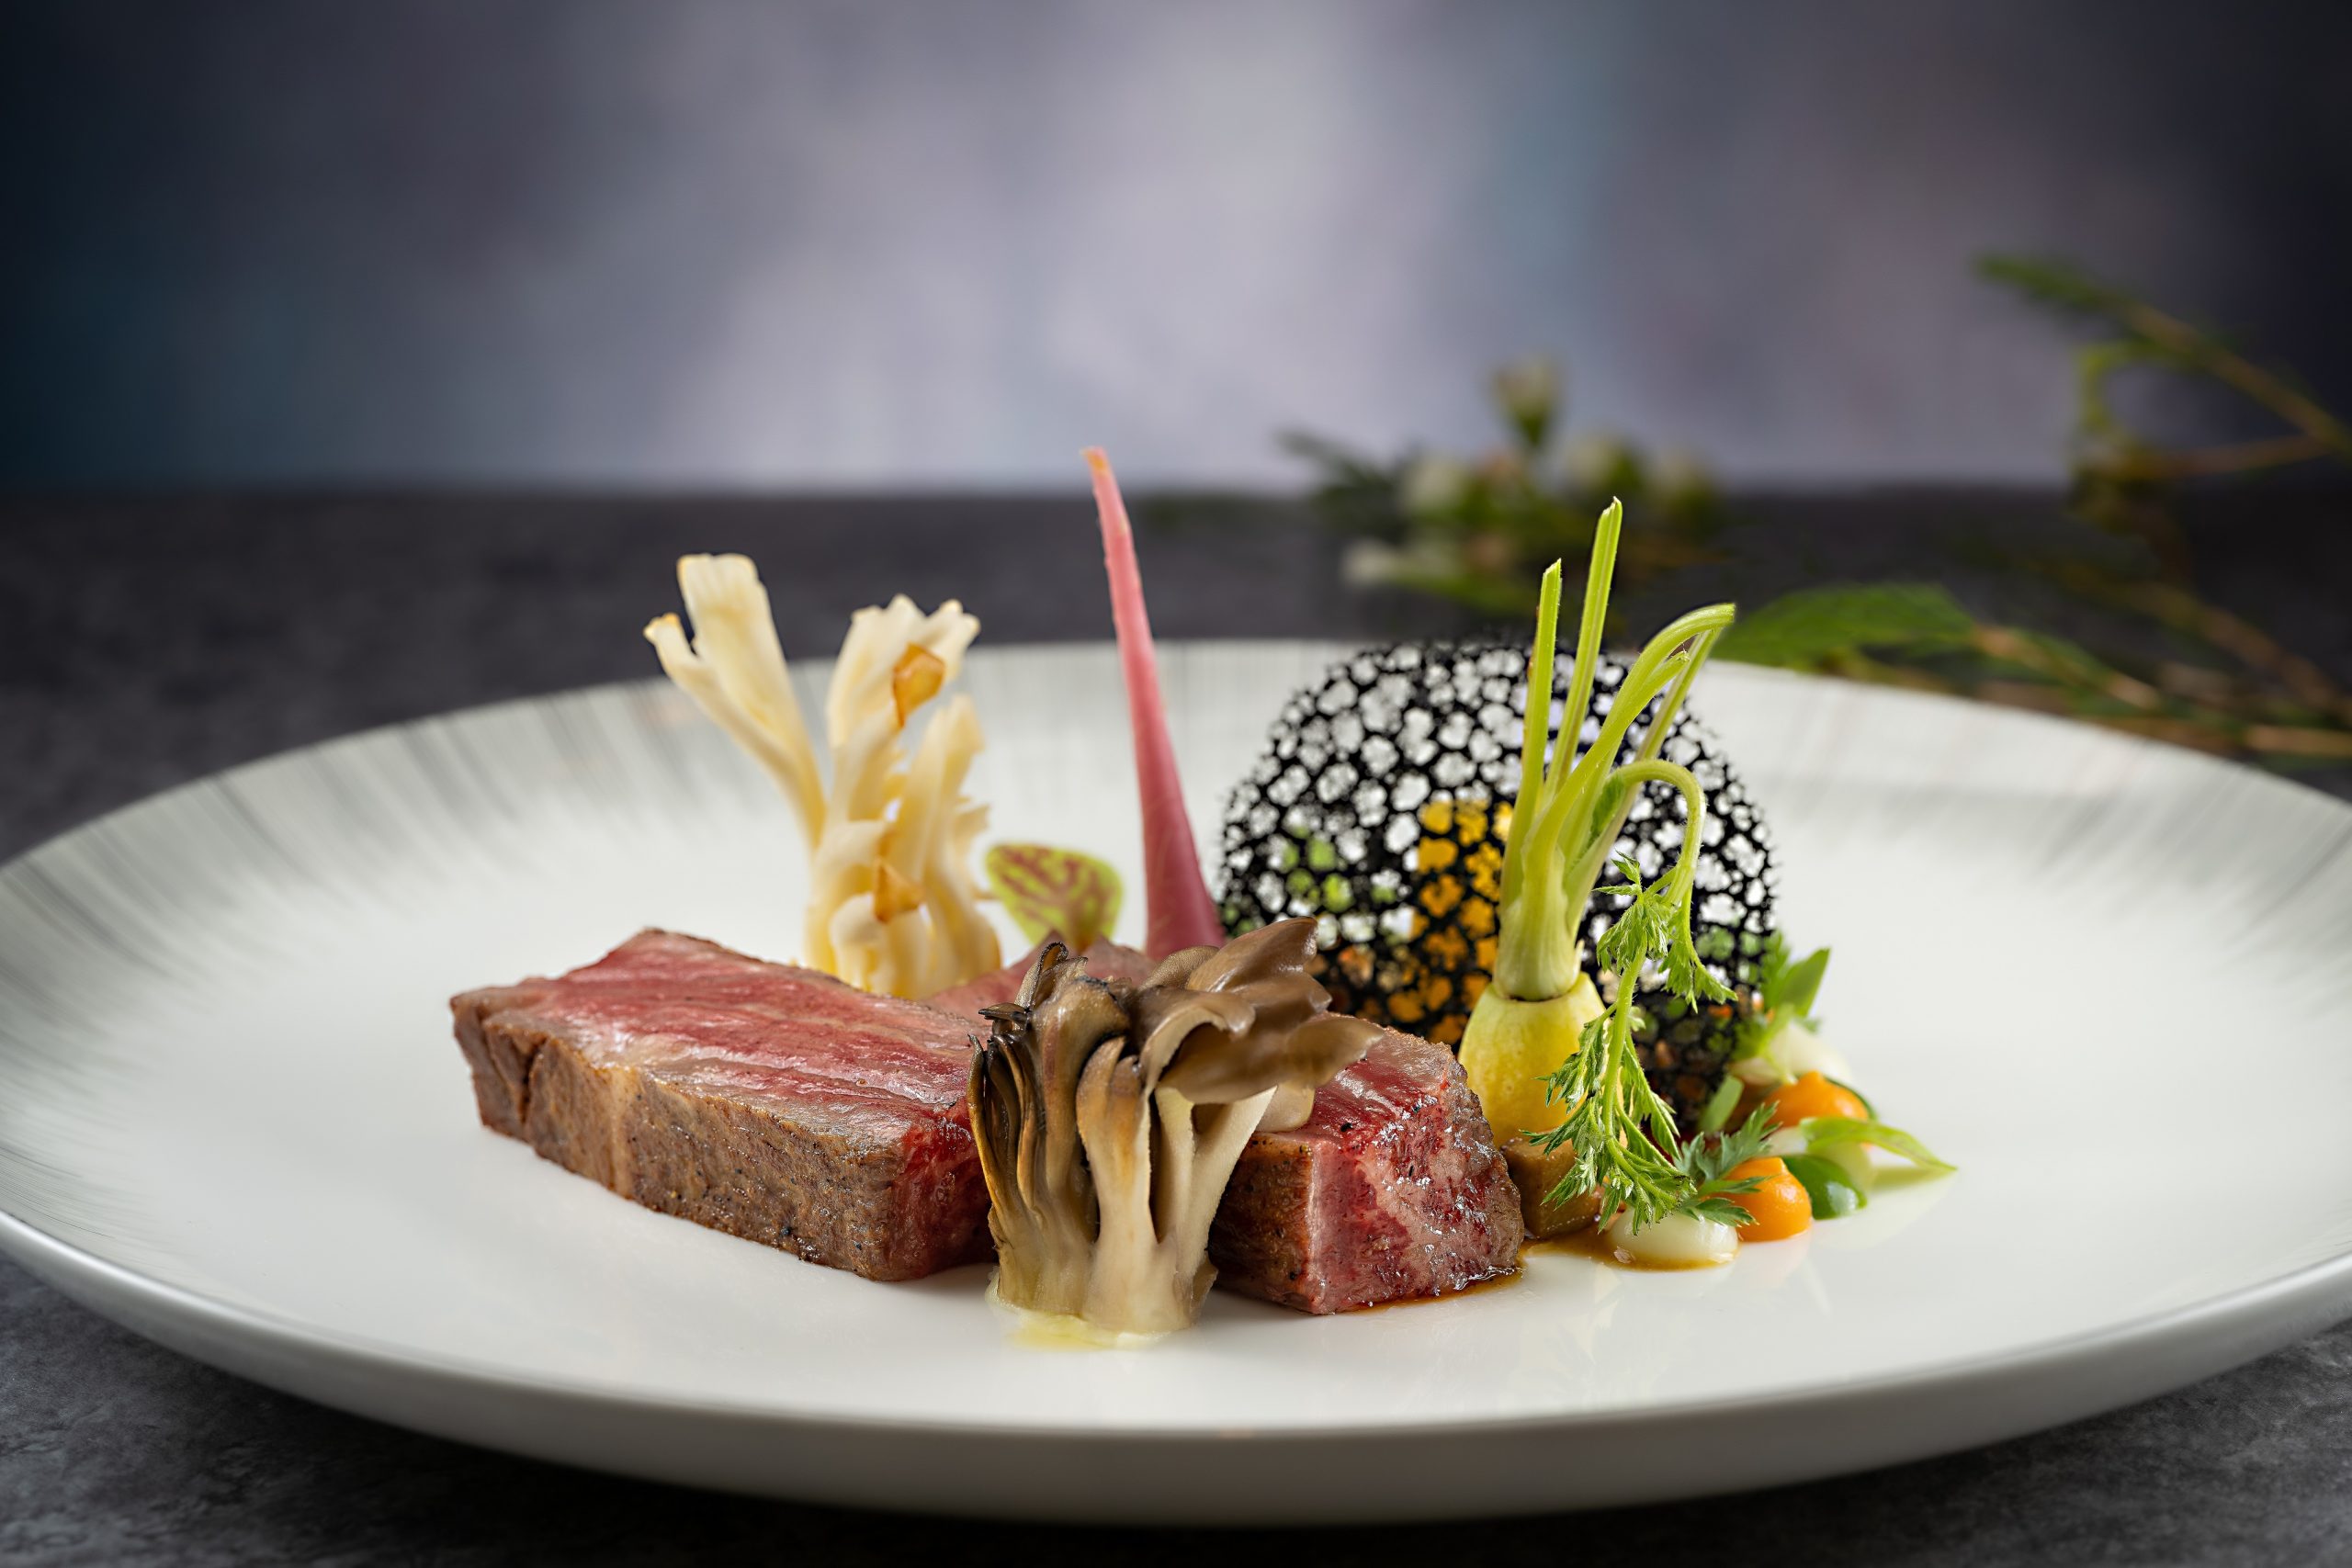 ‘Snow-aging’ gives this Wagyu exceptional marbling and flavour